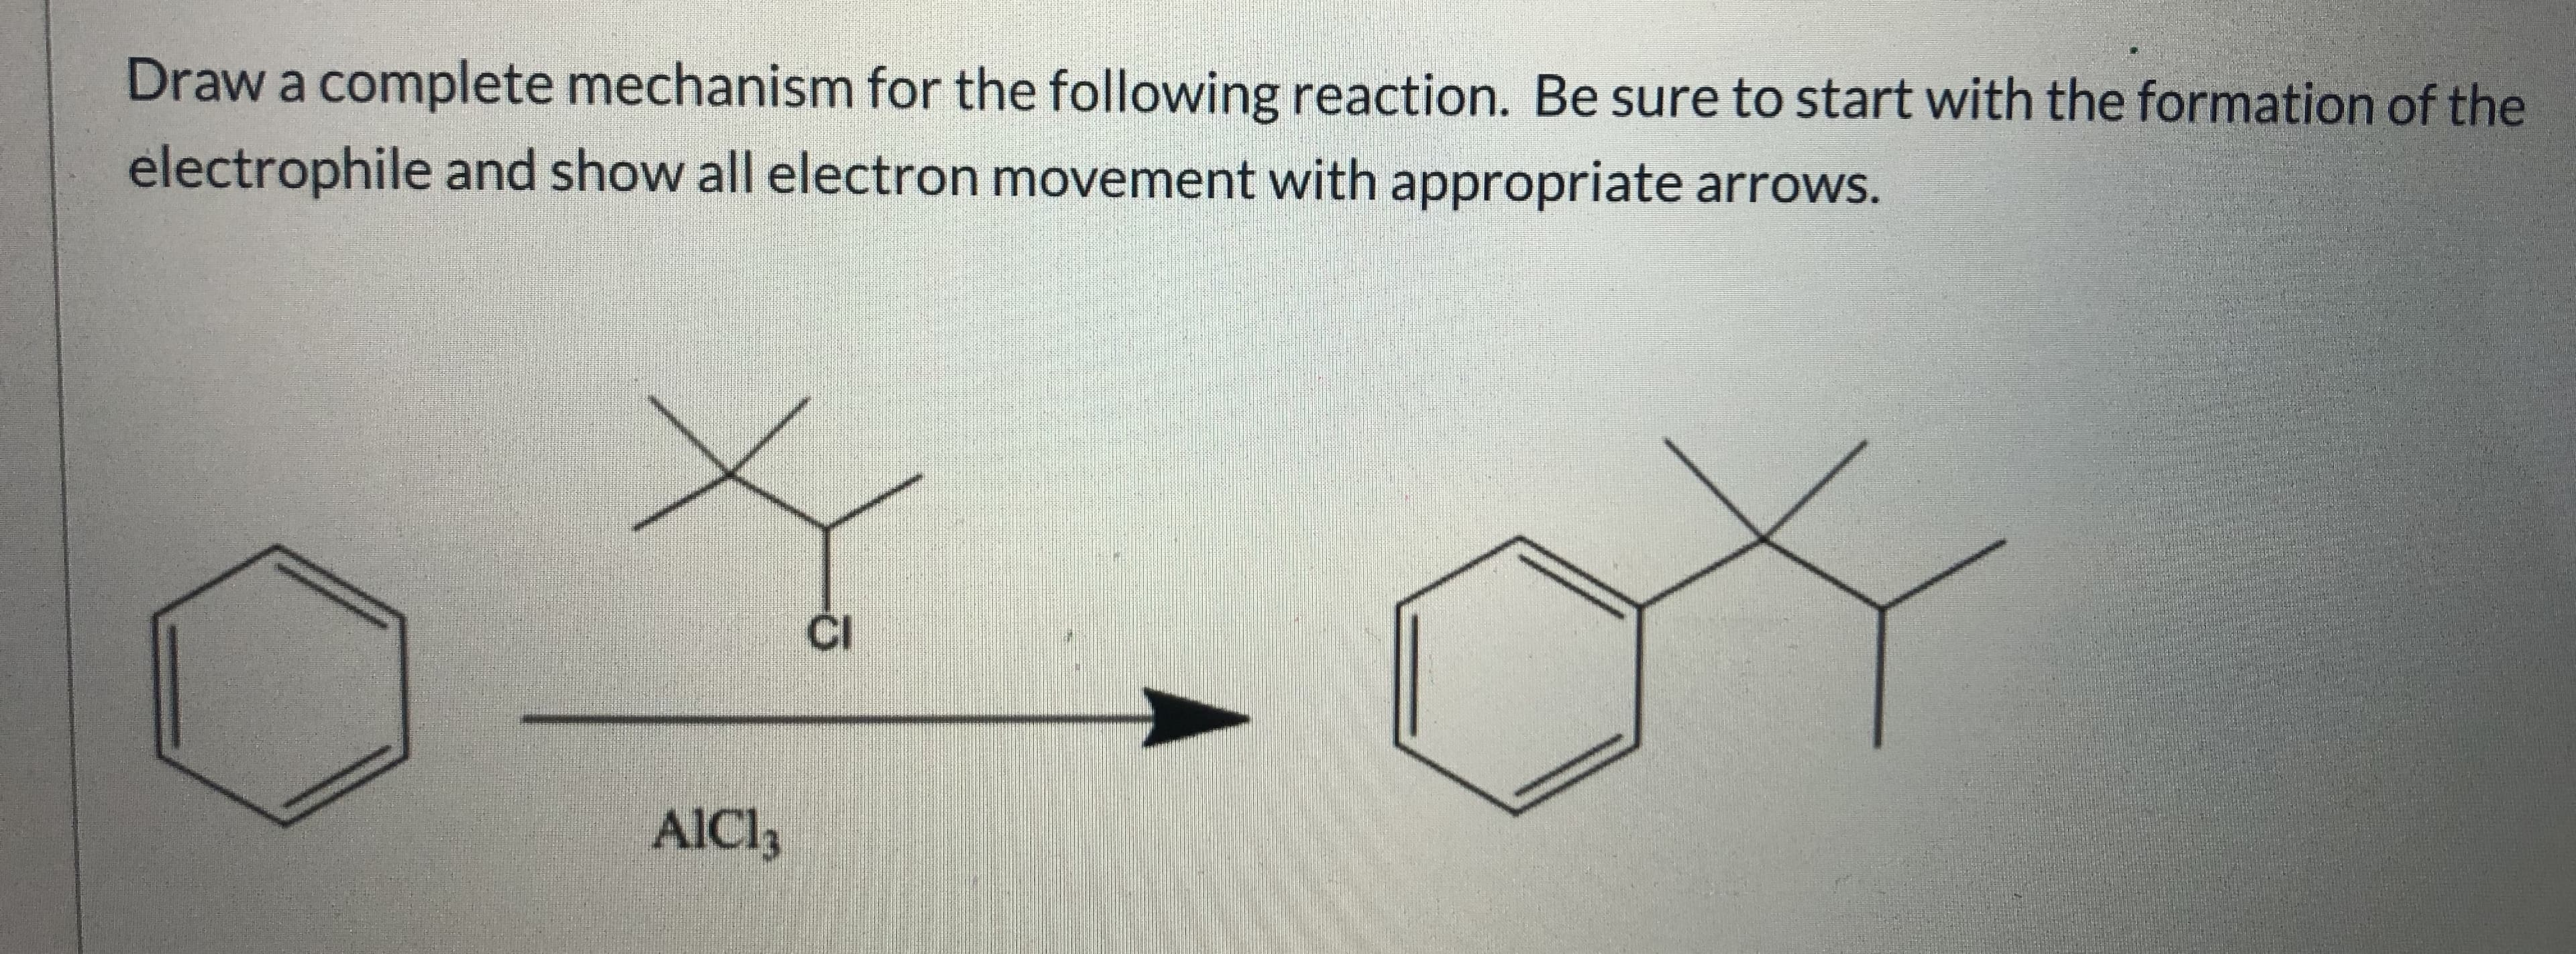 Draw a complete mechanism for the following reaction. Be sure to start with the formation of the
electrophile and show all electron movement with appropriate arrows.
CI
AICI,
